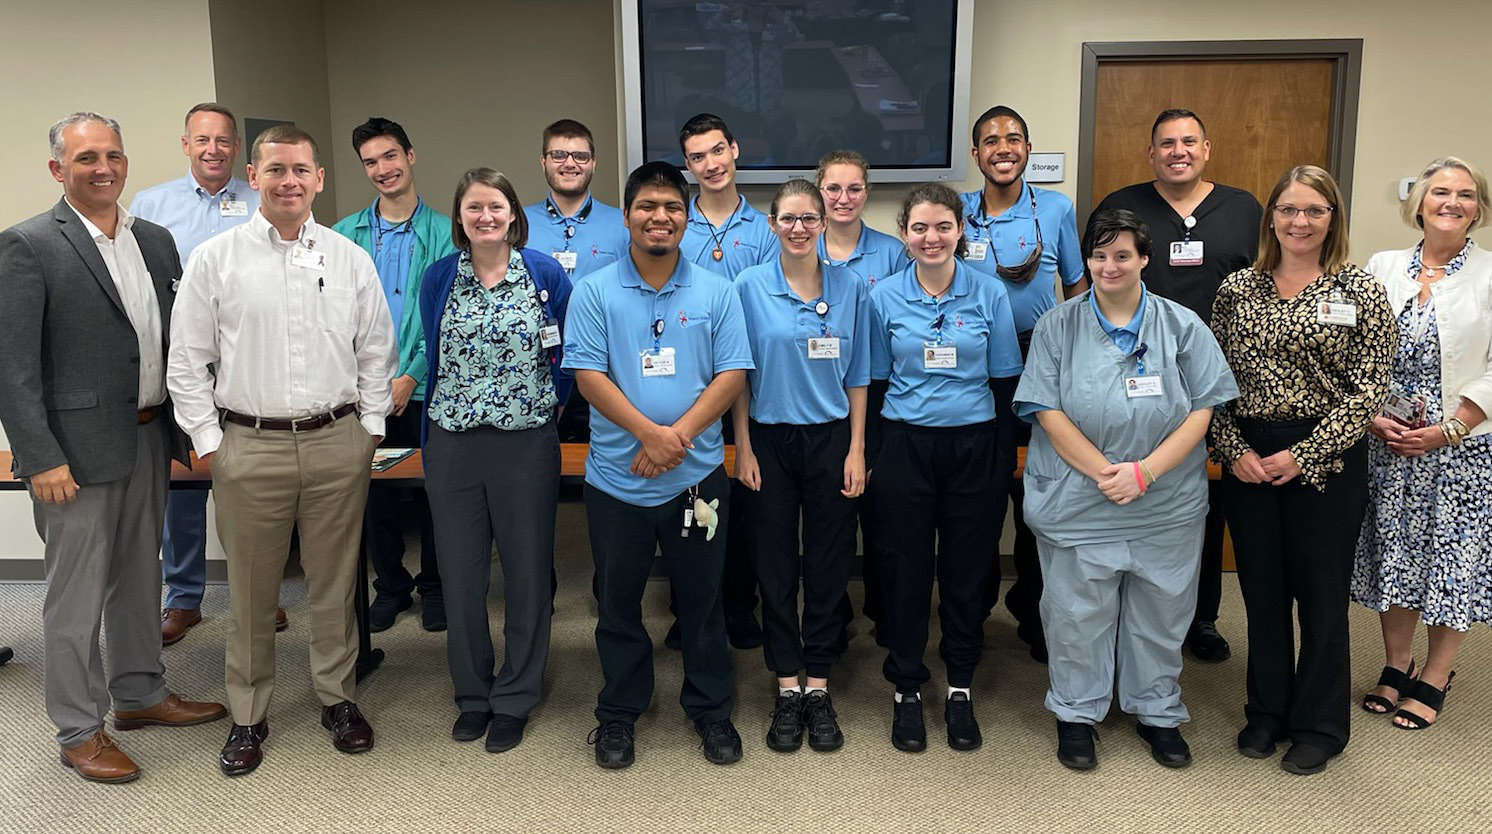 Project SEARCH interns pictured with hospital senior leaders.